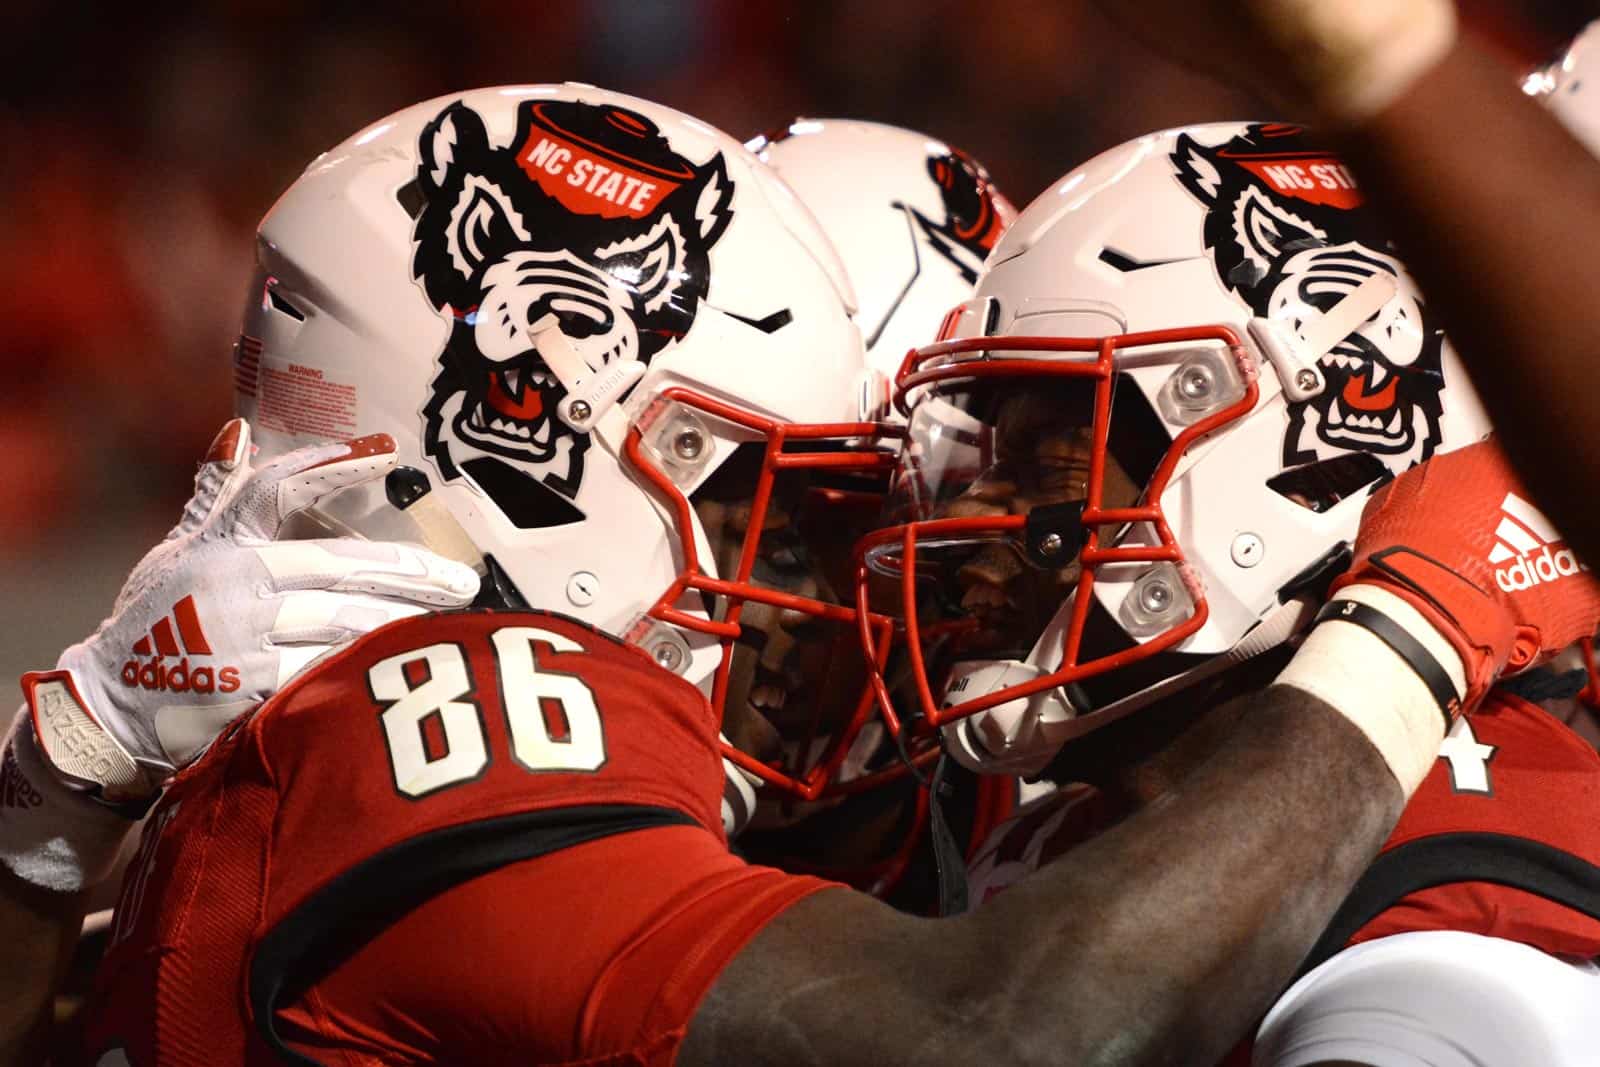 NC State Wolfpack